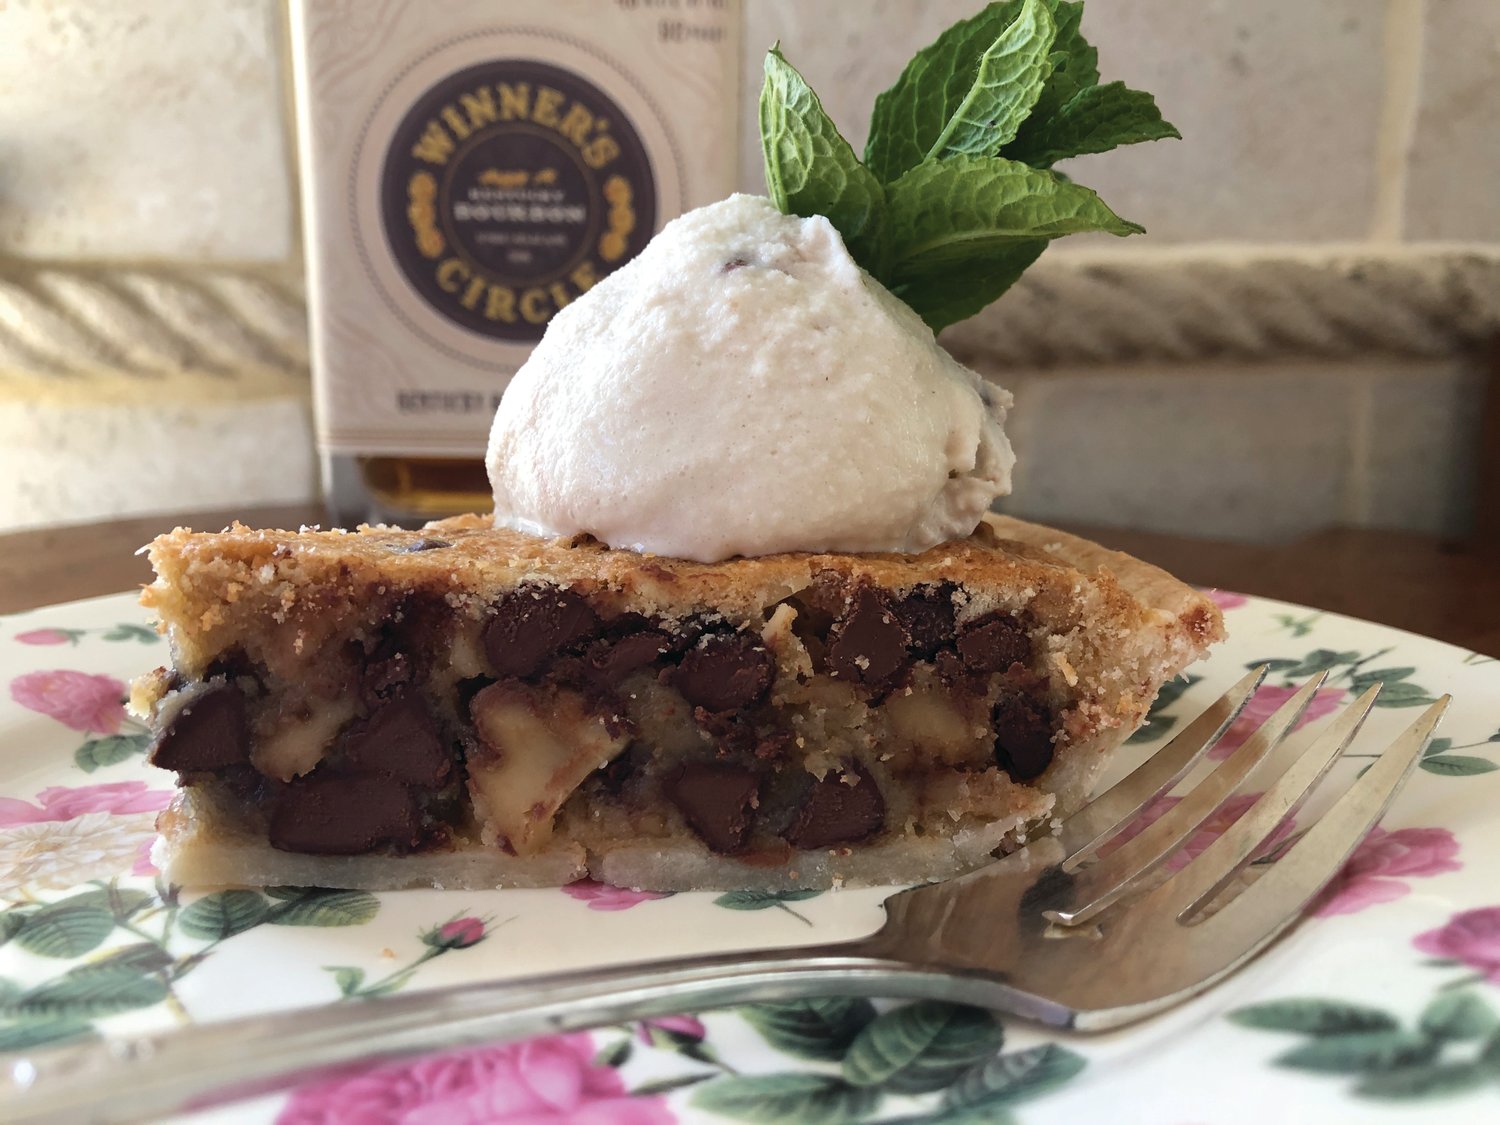 Bourbon Chocolate Walnut Pie is simple to make, and quick, too, if you use a pre-made pie shell.